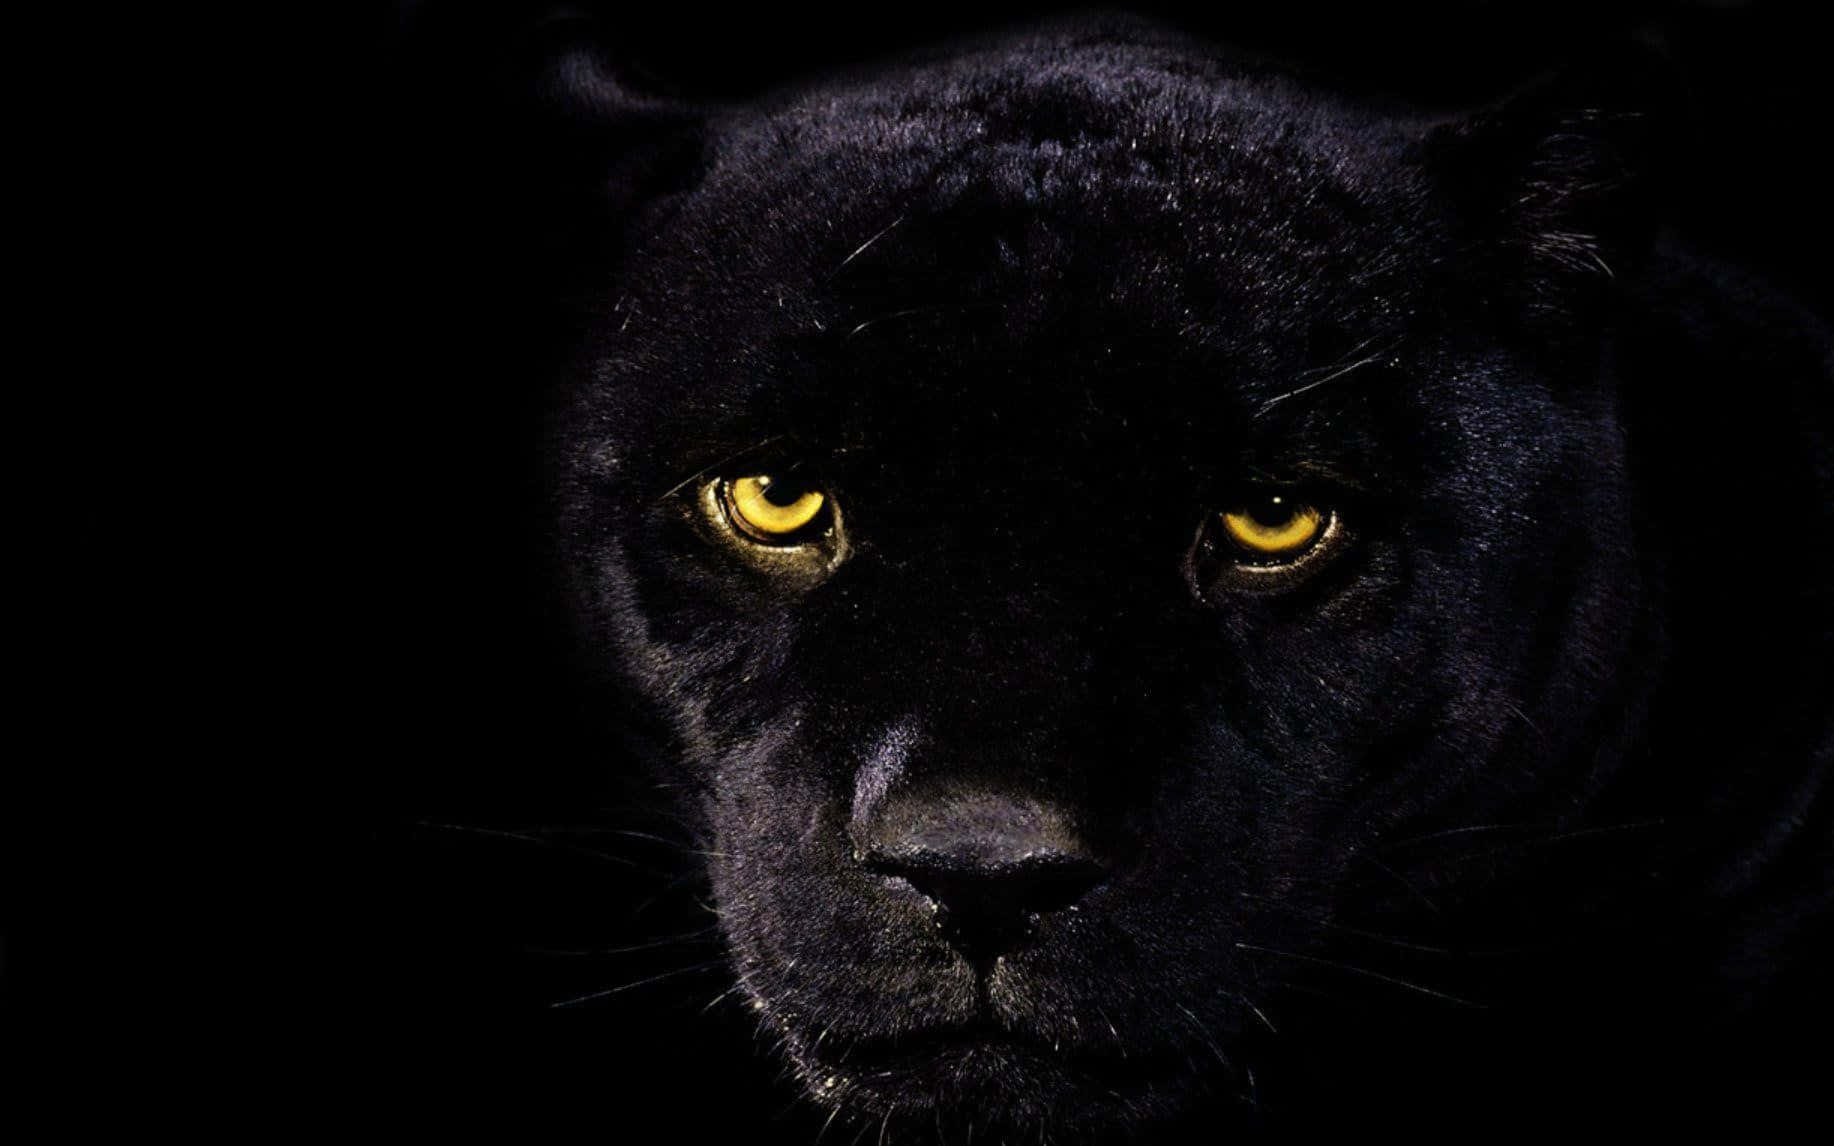 A sleek and powerful Black Jaguar in its natural element Wallpaper